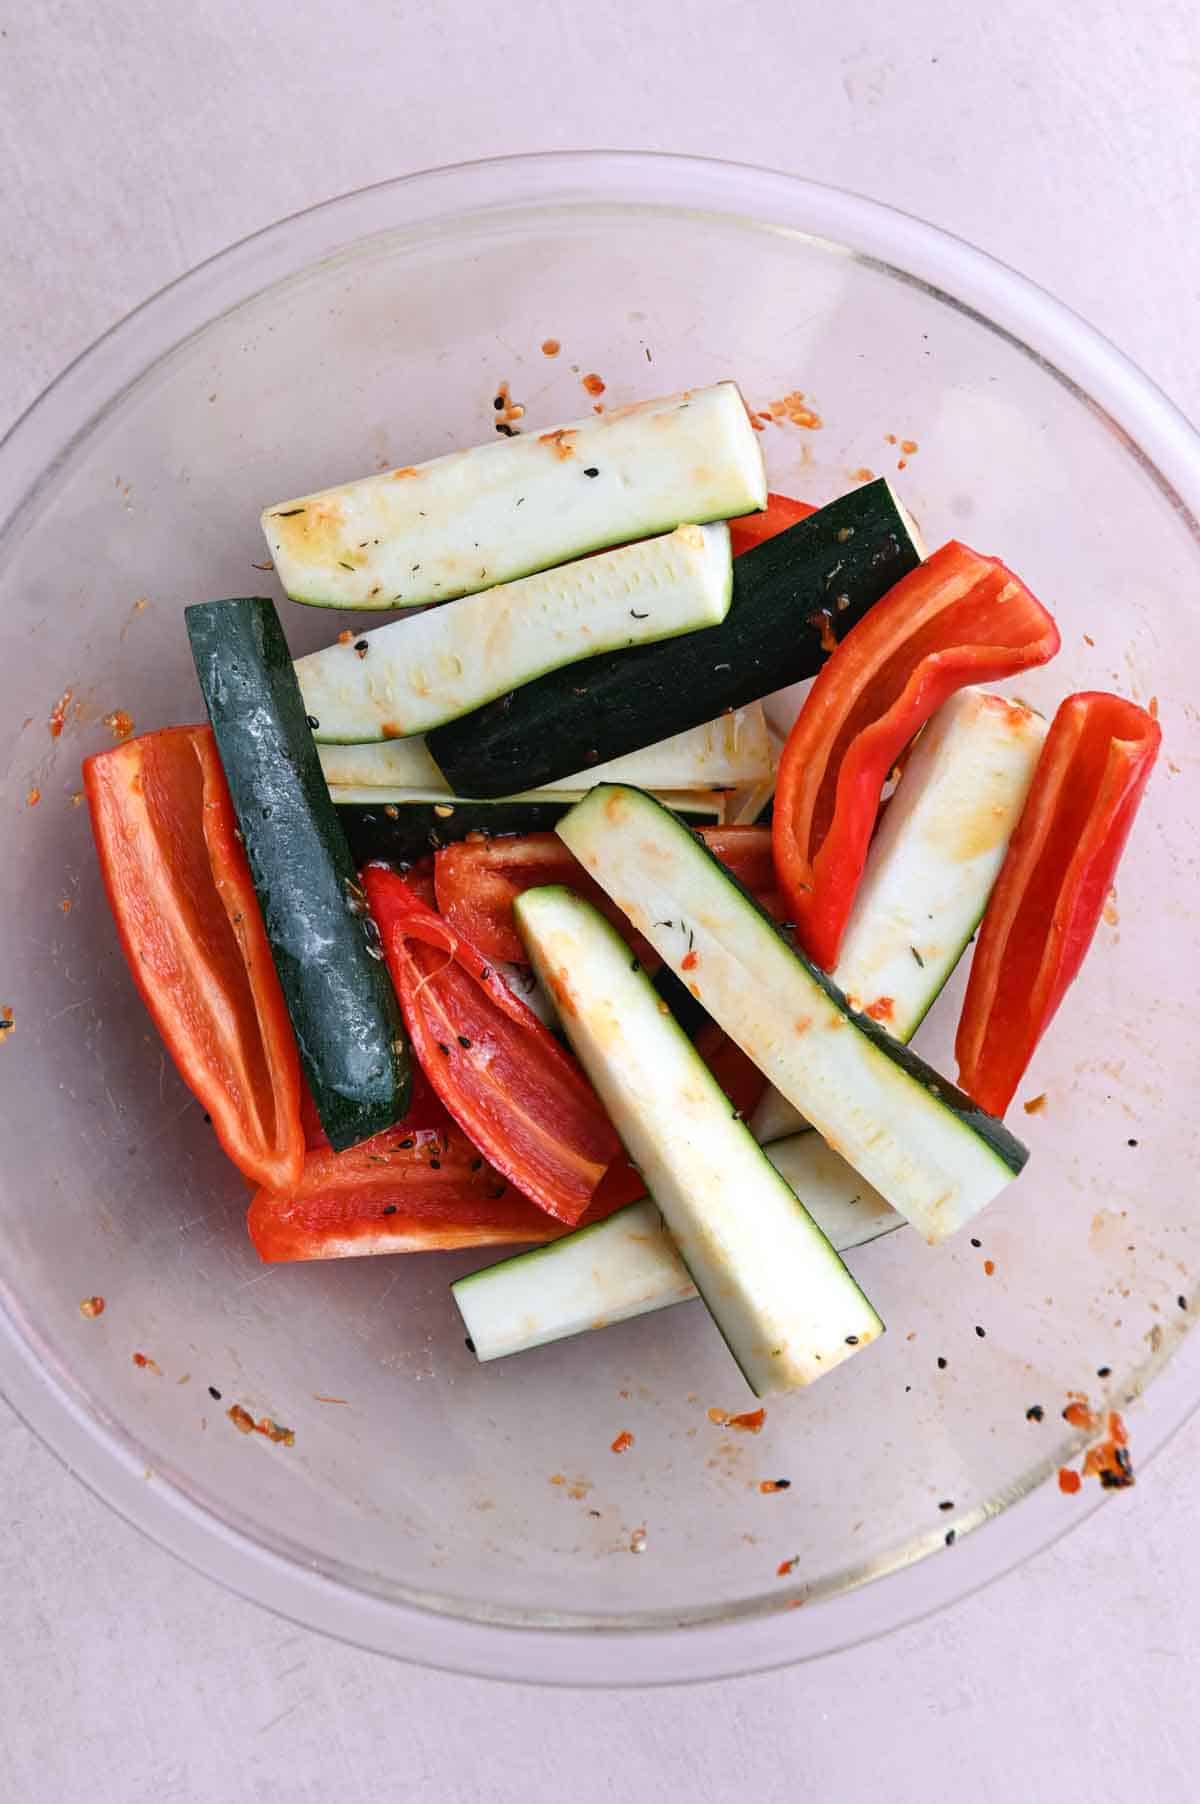 Zucchini wedges and red bell pepper strips in a large glass bowl.